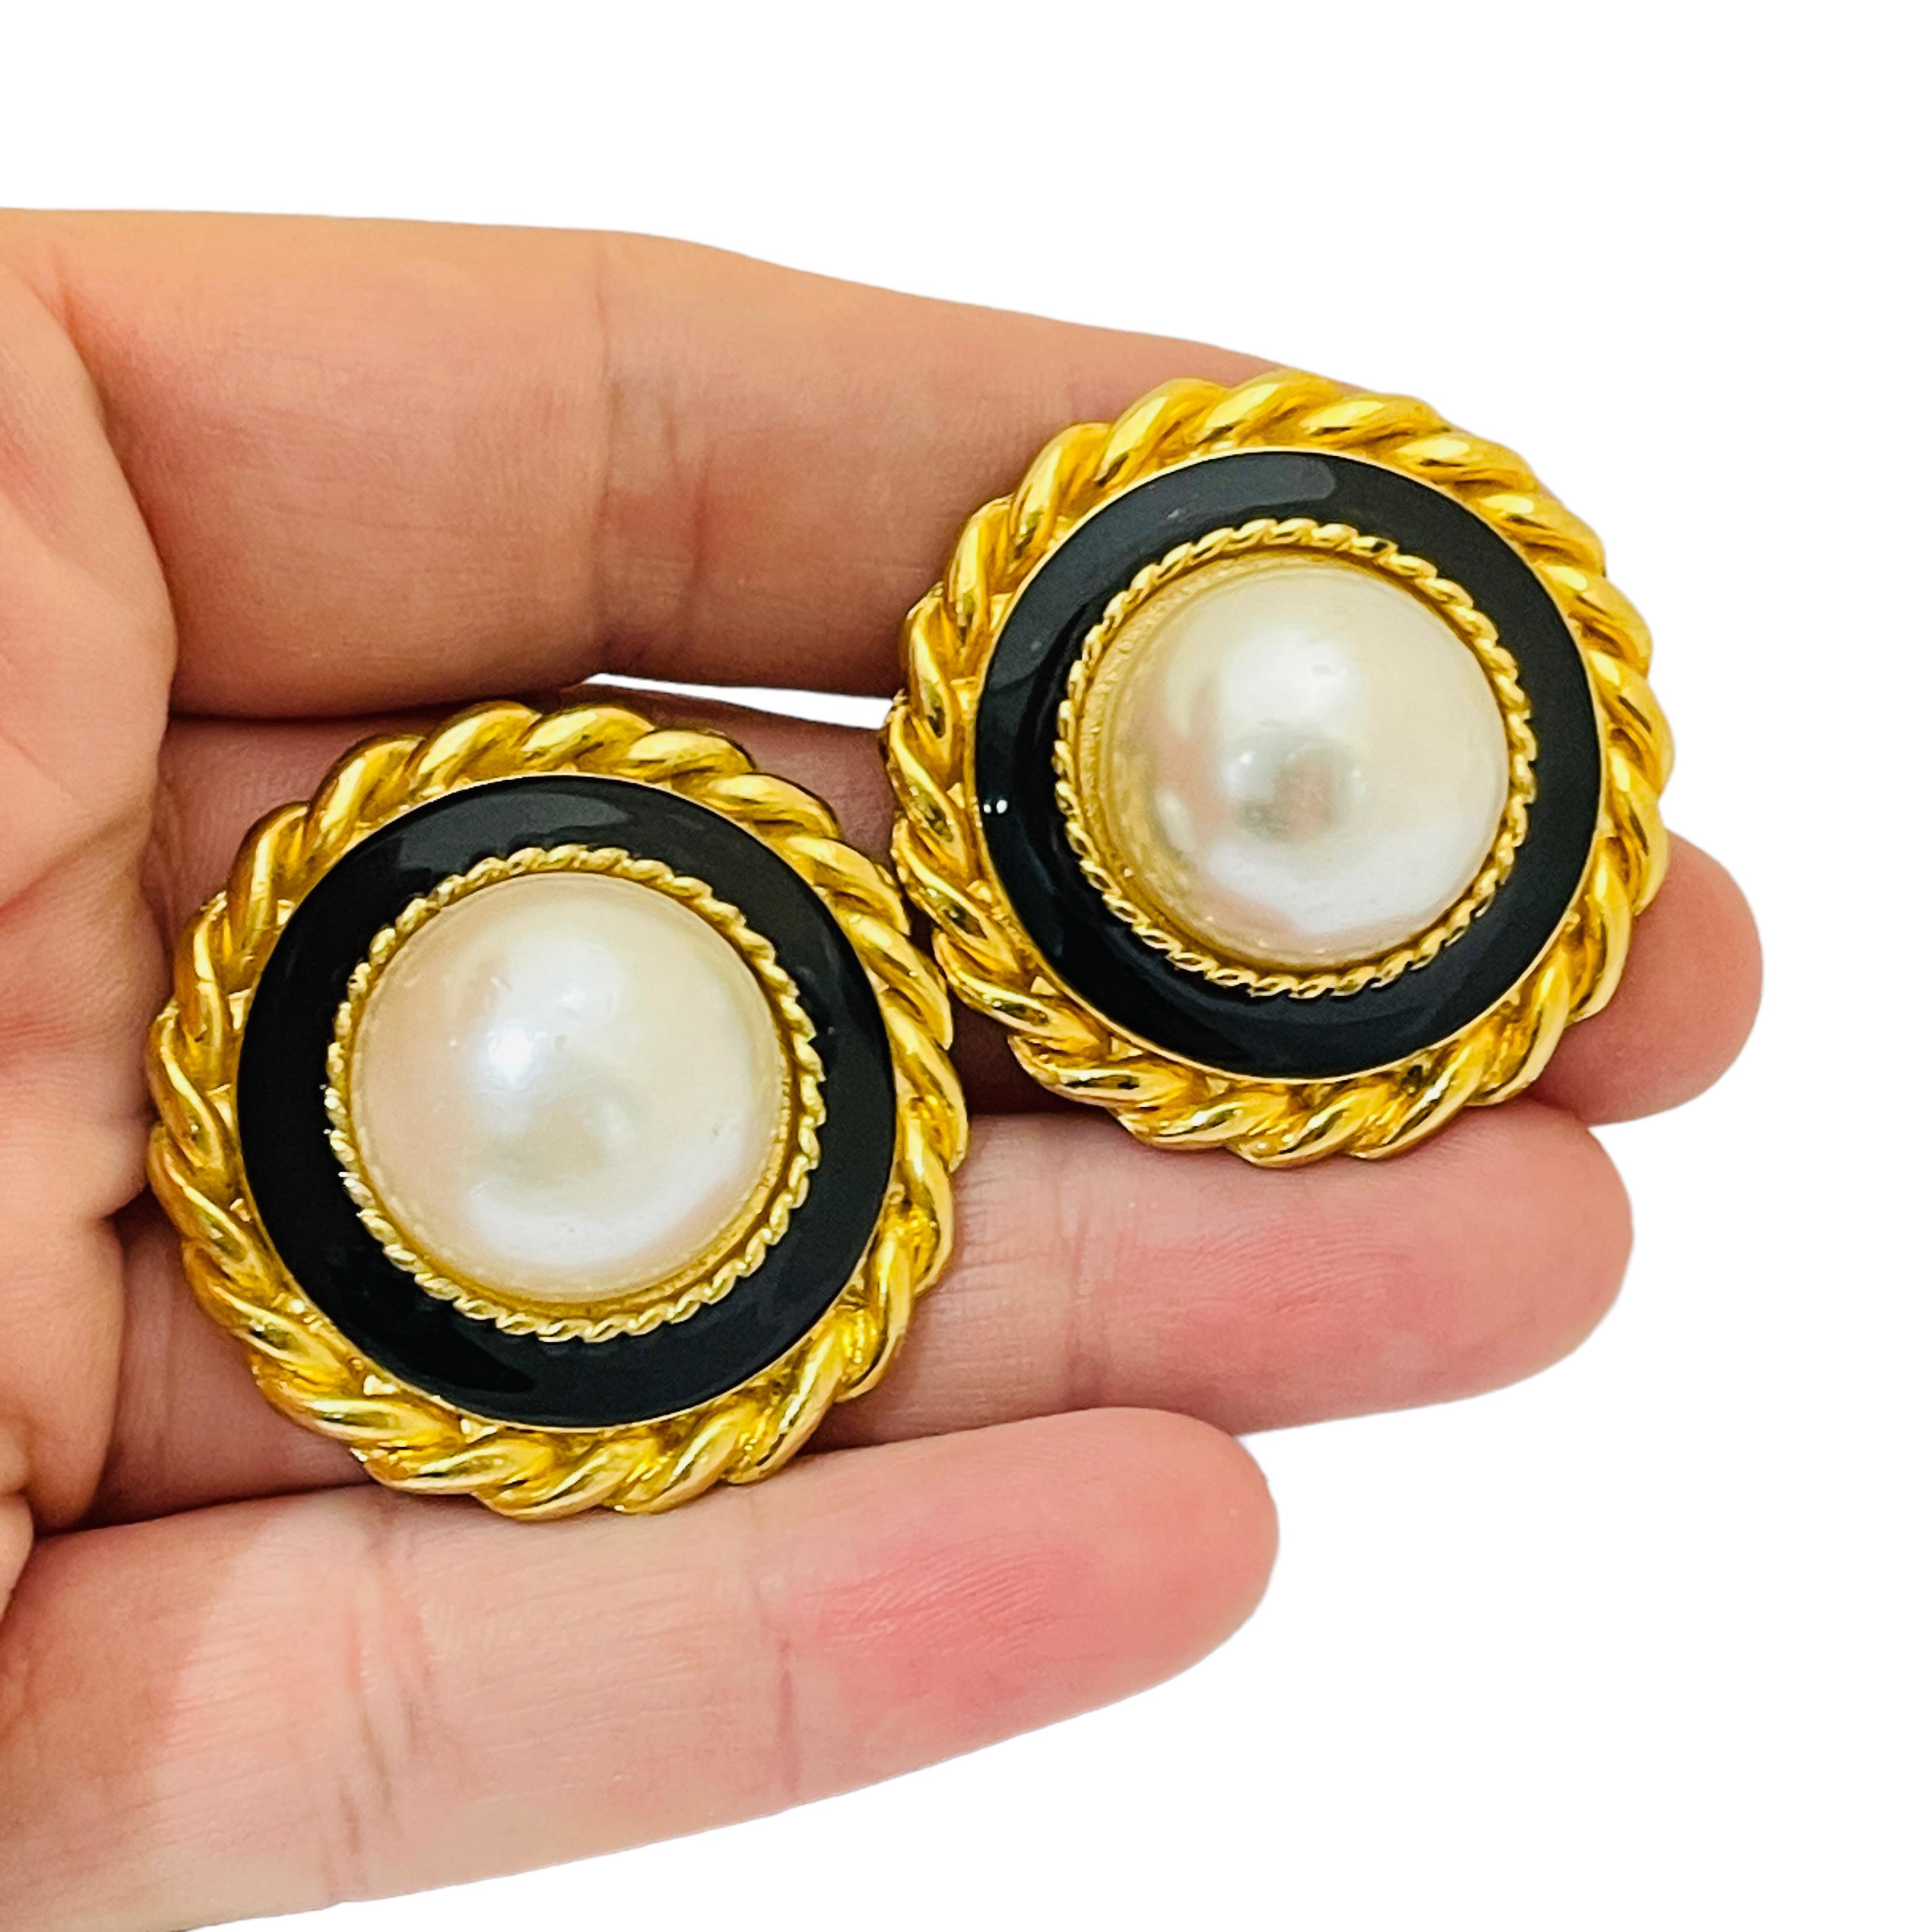 DETAILS

• unsigned 

• gold tone with pearl and enamel

• vintage designer pierced earrings

MEASUREMENTS

• 1.38